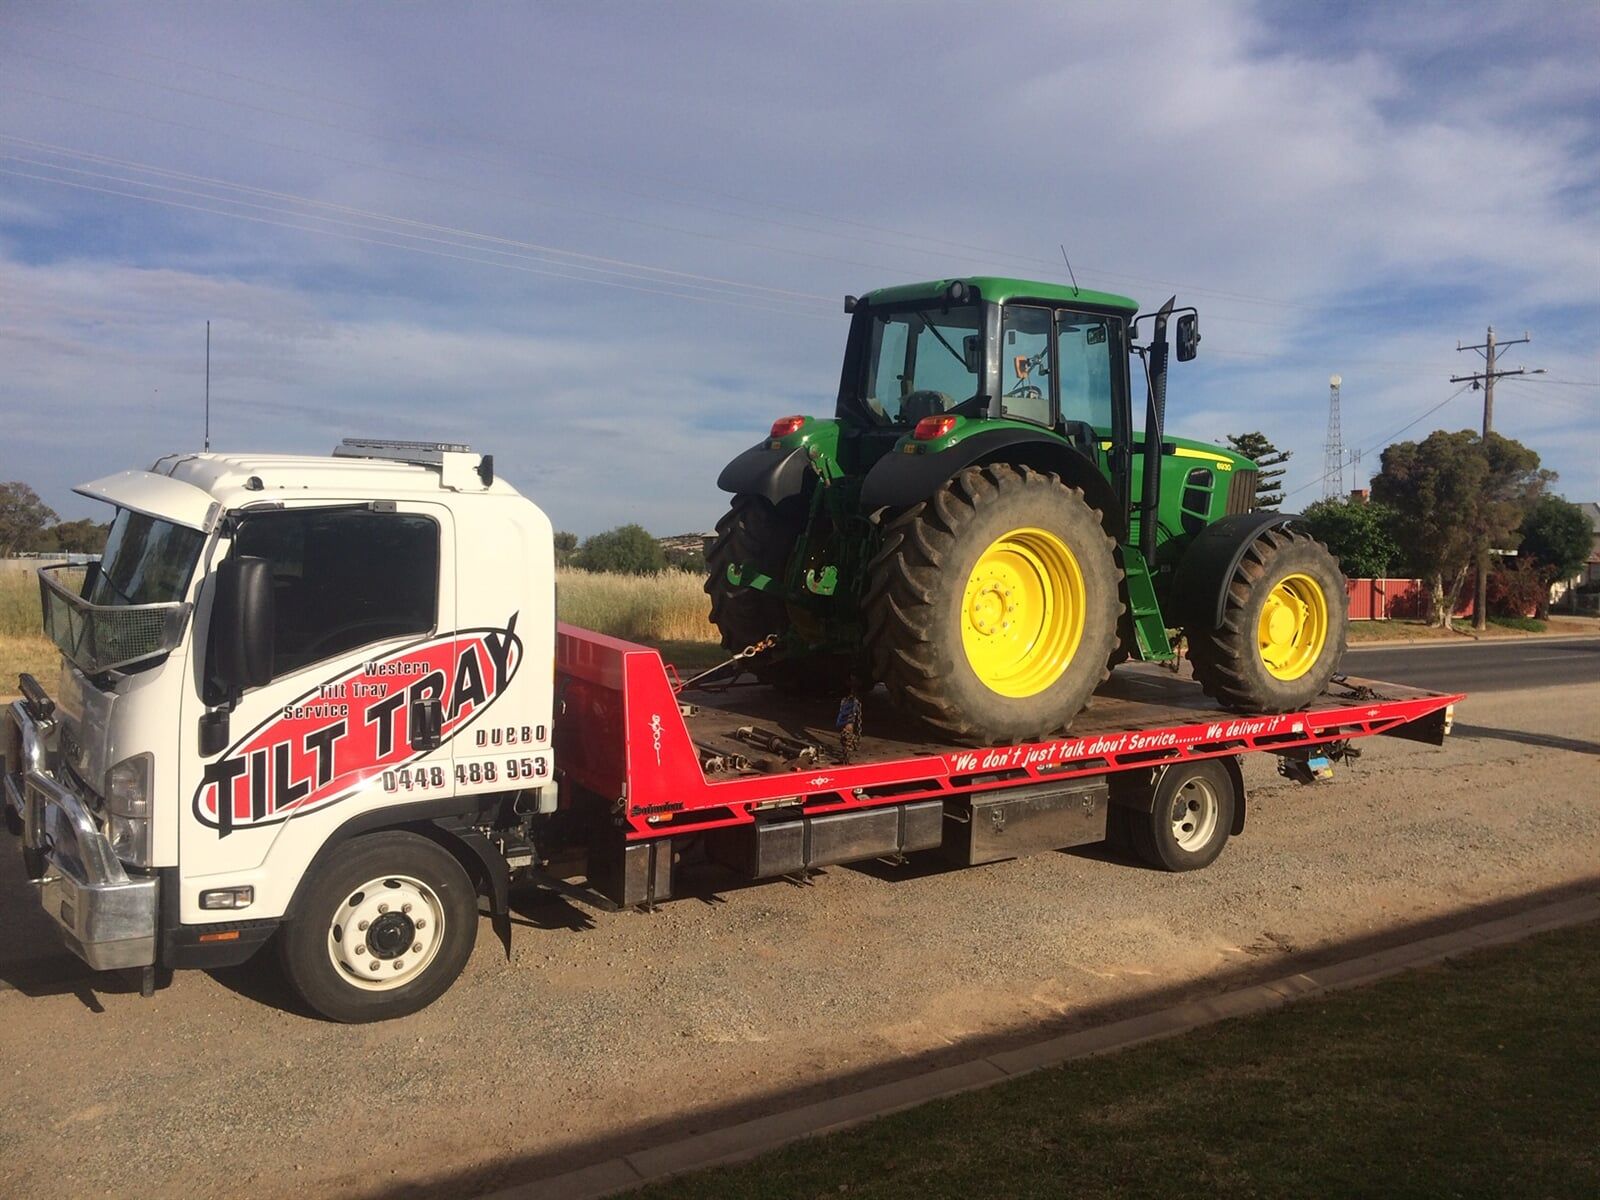 Truck towing tractor — Towing in Bourke in Dubbo, NSW